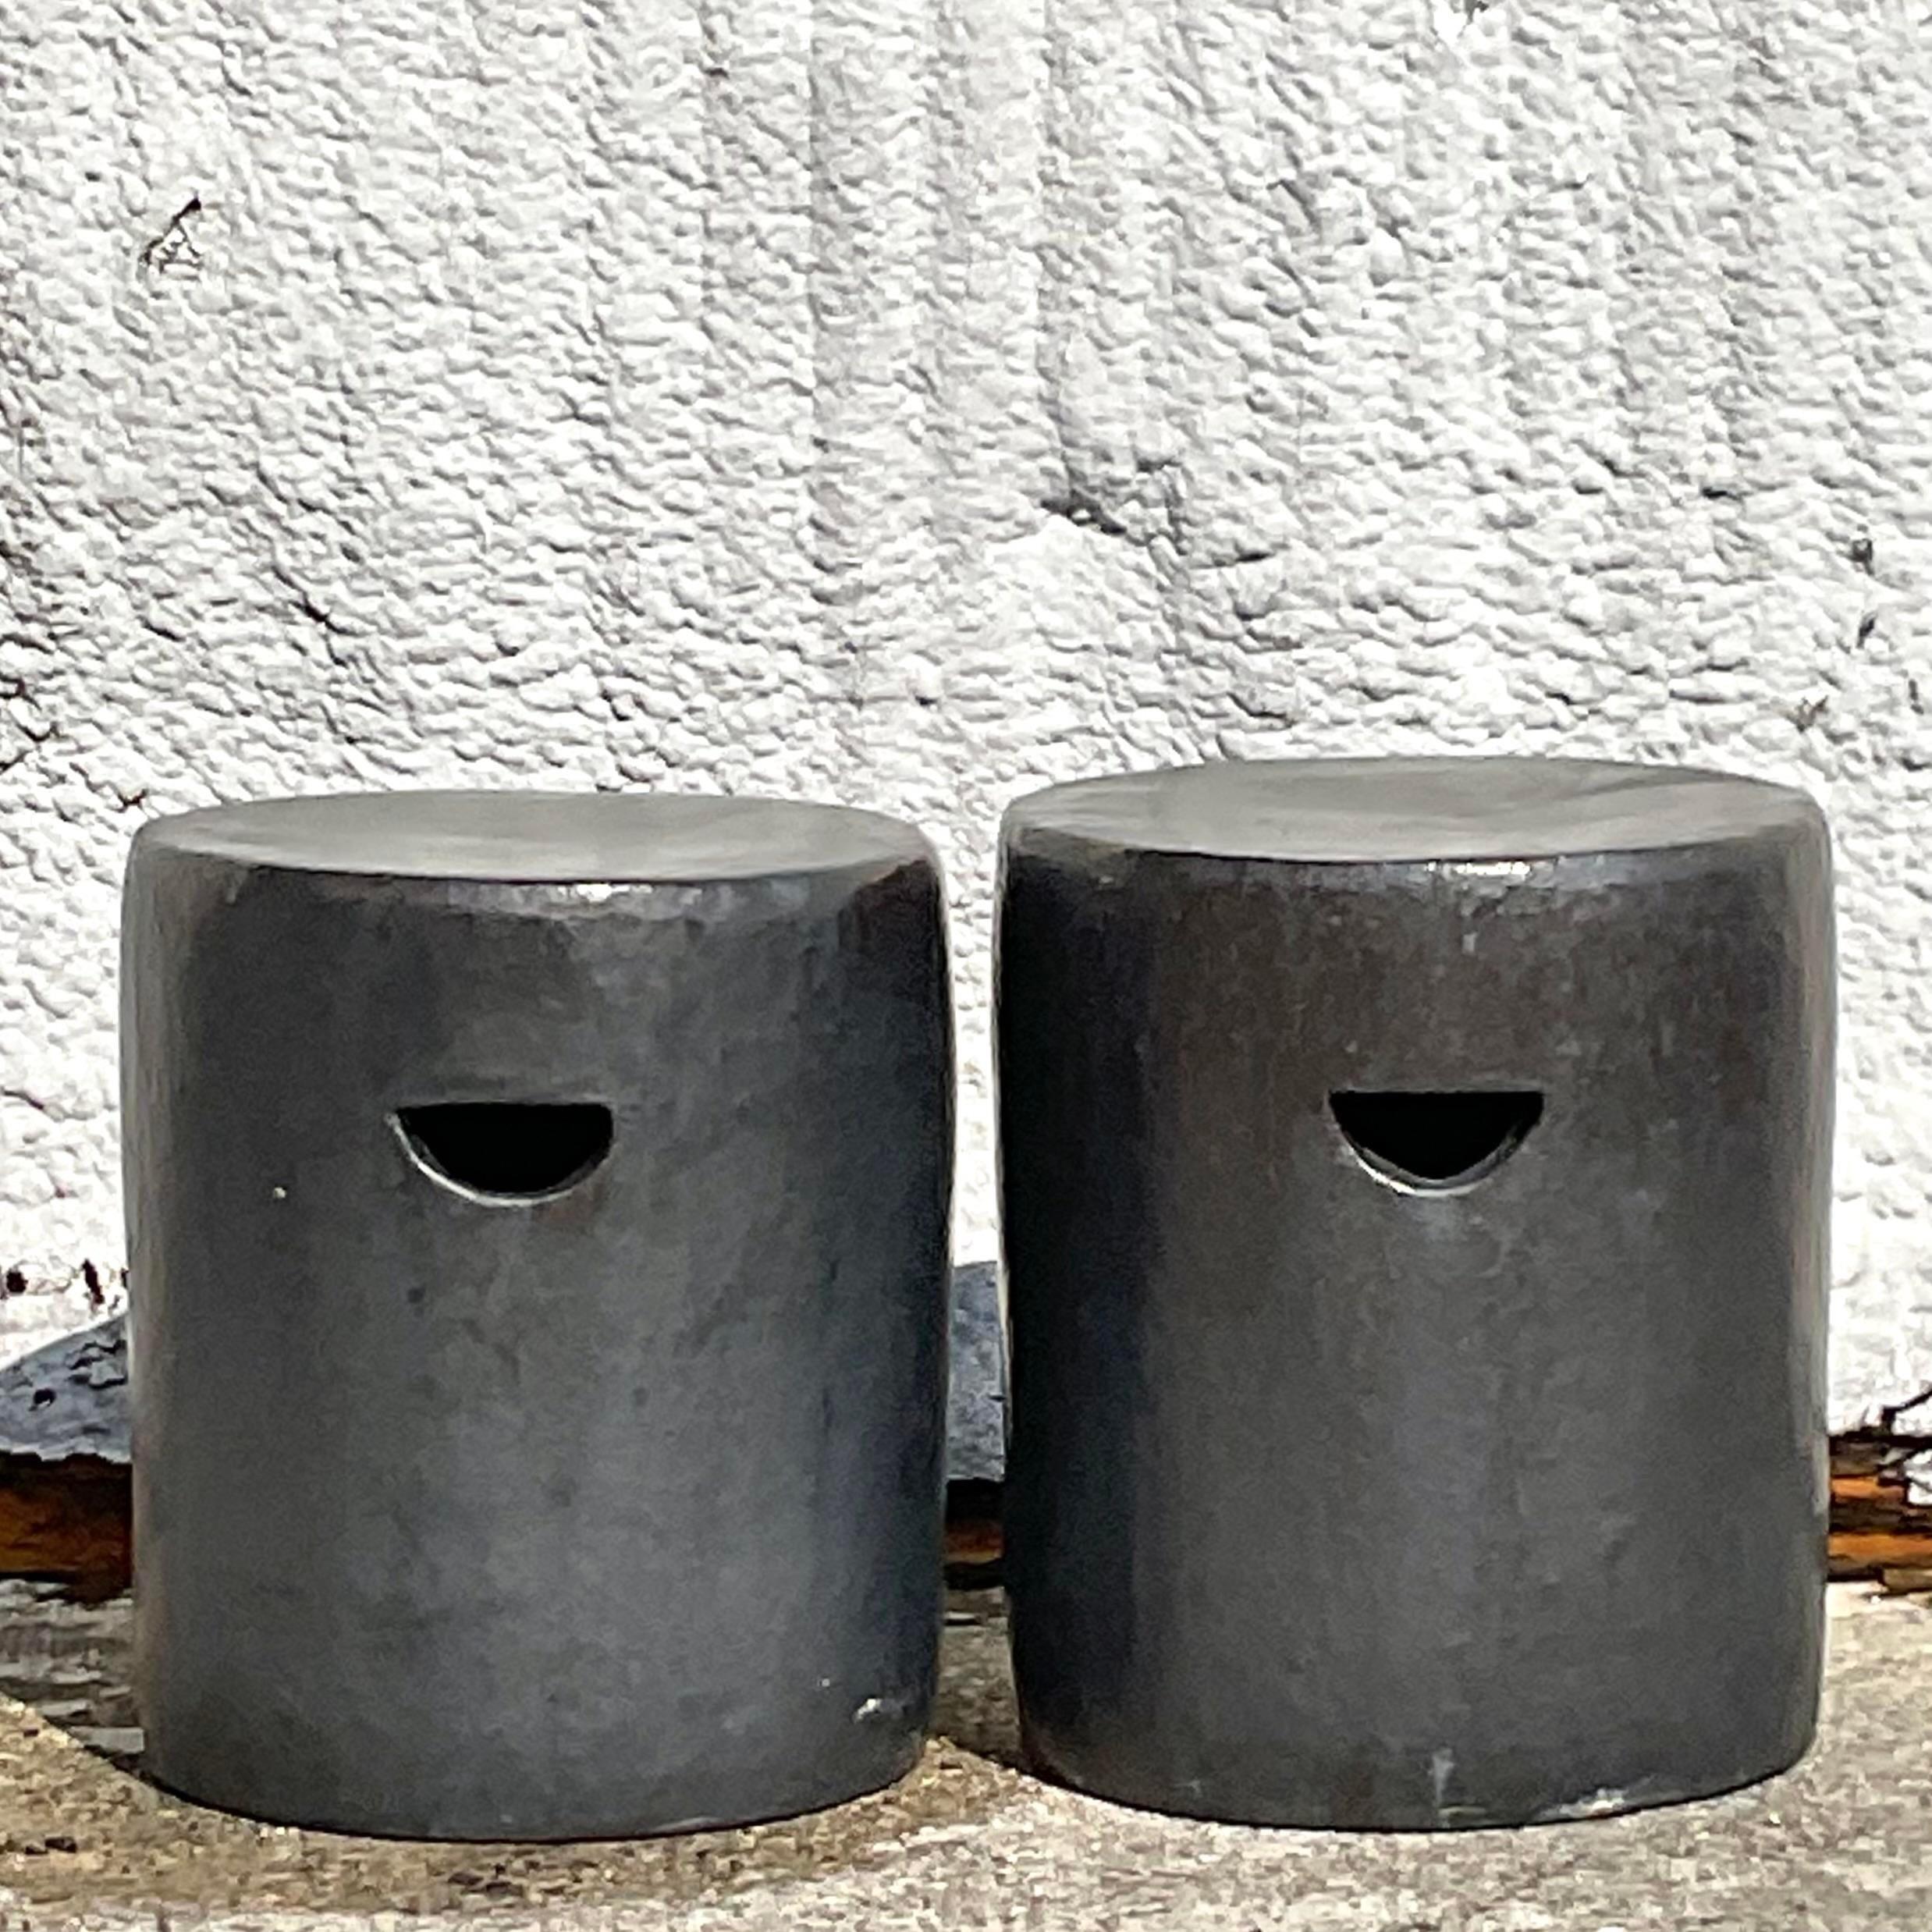 A fabulous pair of Boho low garden stools. A chic matte glazed heavy ceramic with chic and simple half moon cutouts. A beautiful grey color. Acquired from a Palm Beach estate.

One stool is slightly lower than the other by 3/4 of an inch. But it